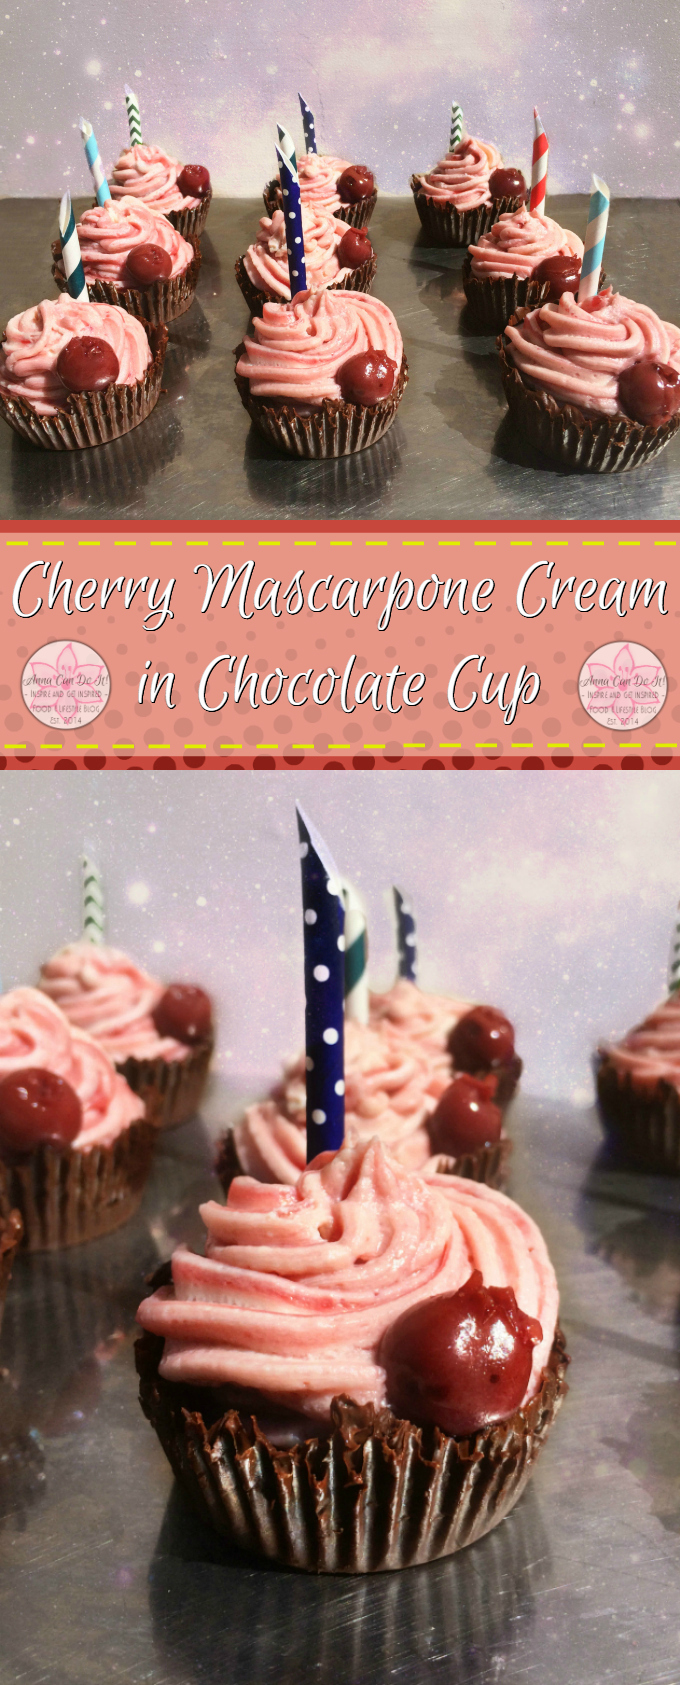 Cherry Mascarpone Cream in Chocolate Cup - Anna Can Do It! * Rich, sweet and tart cherry mascarpone cream in chocolate cup. Quick and easy dessert recipe which will enchant your guests!